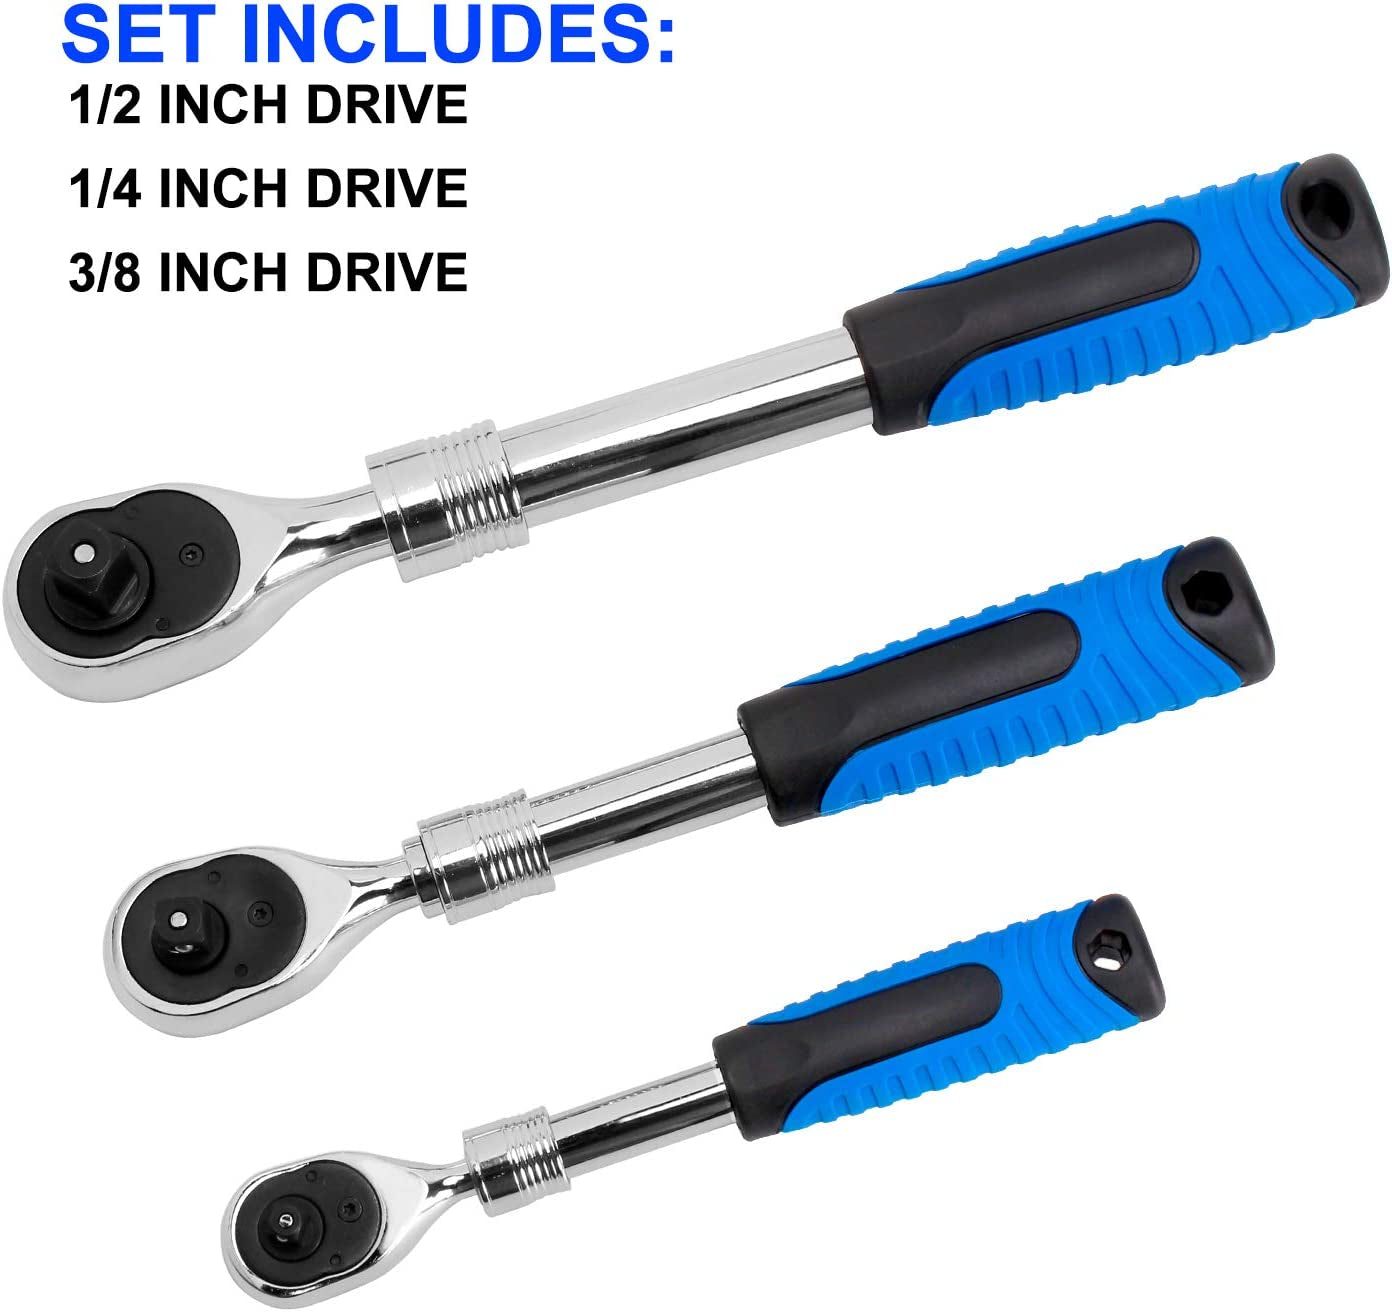 3-Piece Extendable Ratchet Set 1/4" 3/8" 1/2-Inch Drive Socket Wrench 72-Tooth Quick-Release Reversible CR-V Gear Torque Spanner with Soft Grip Handle Hand Tools